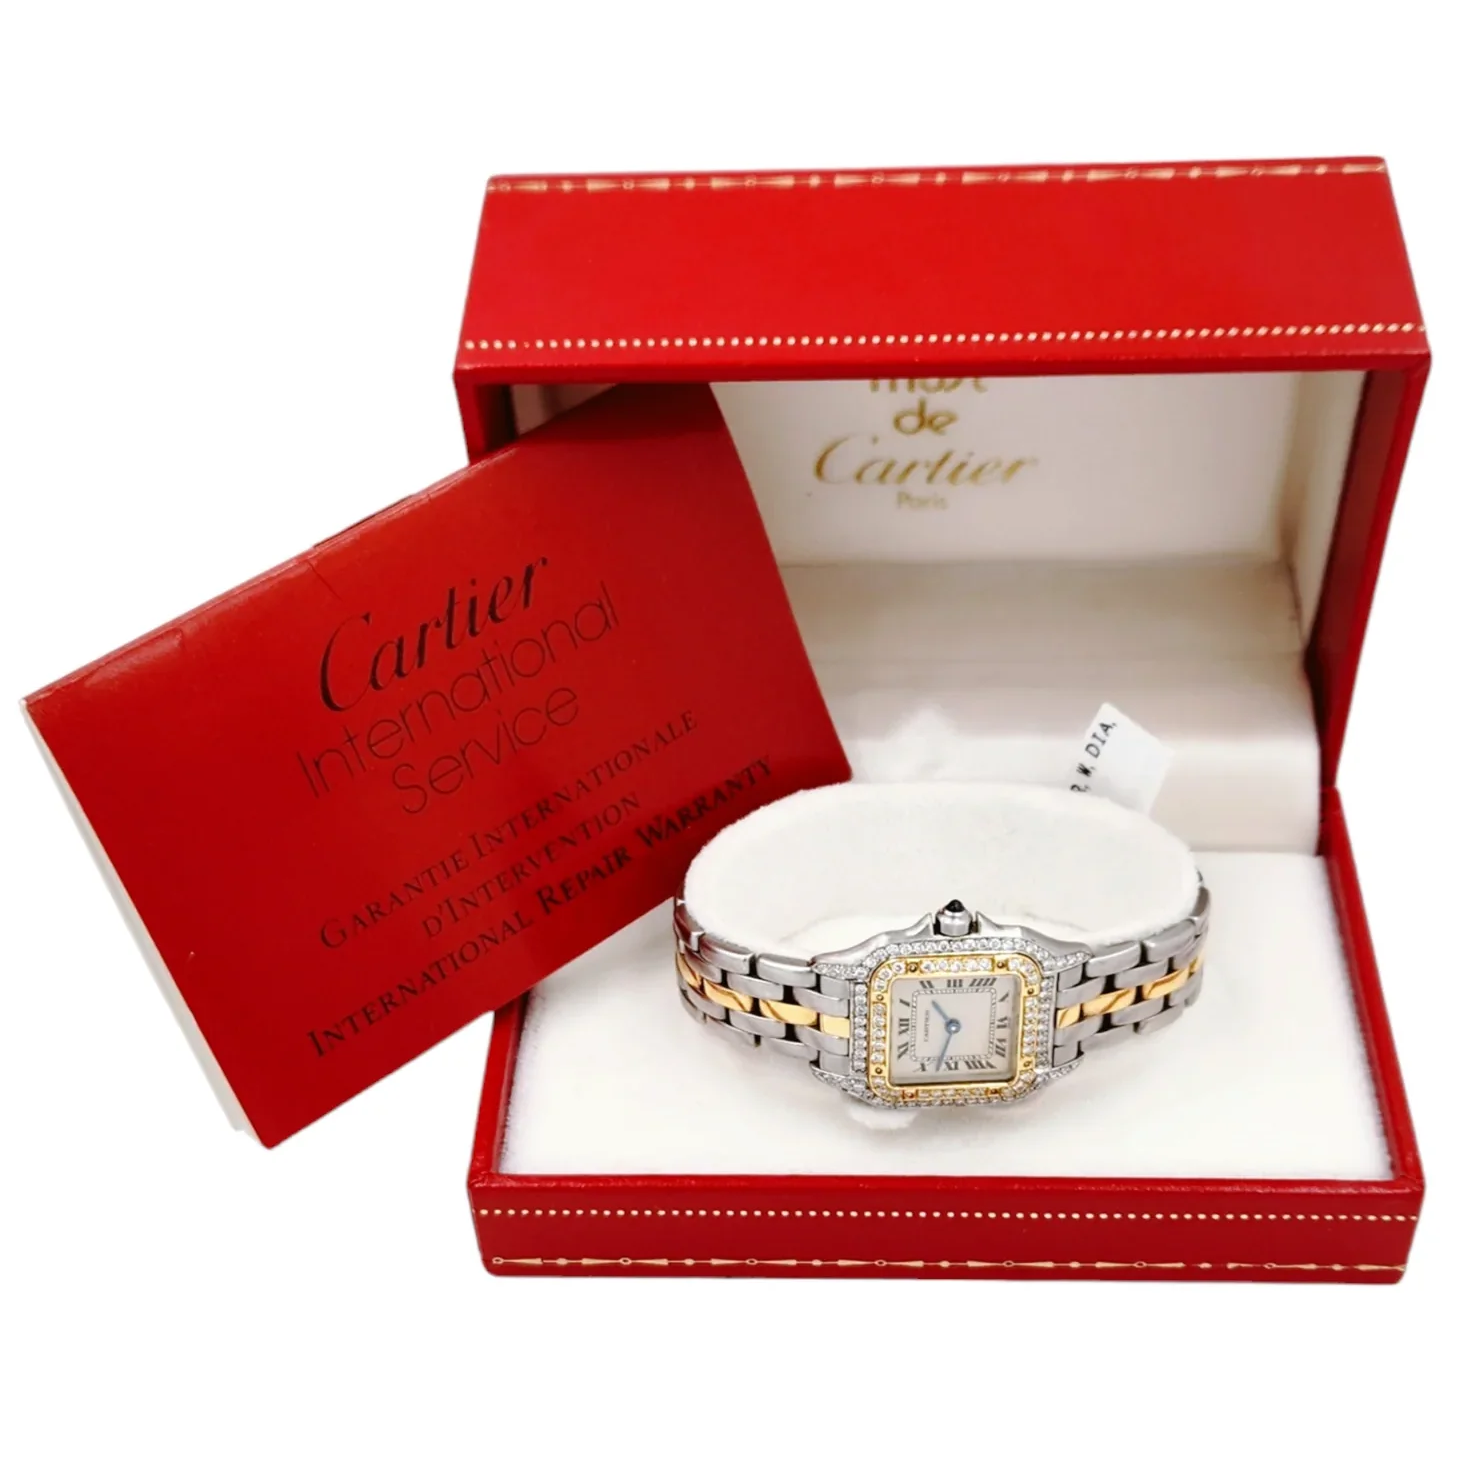 Ladies Small Cartier Panthere 22mm x 30mm Watch in 18K Yellow Gold / Stainless Steel with Diamond Bezel and White Dial. (Pre-Owned)